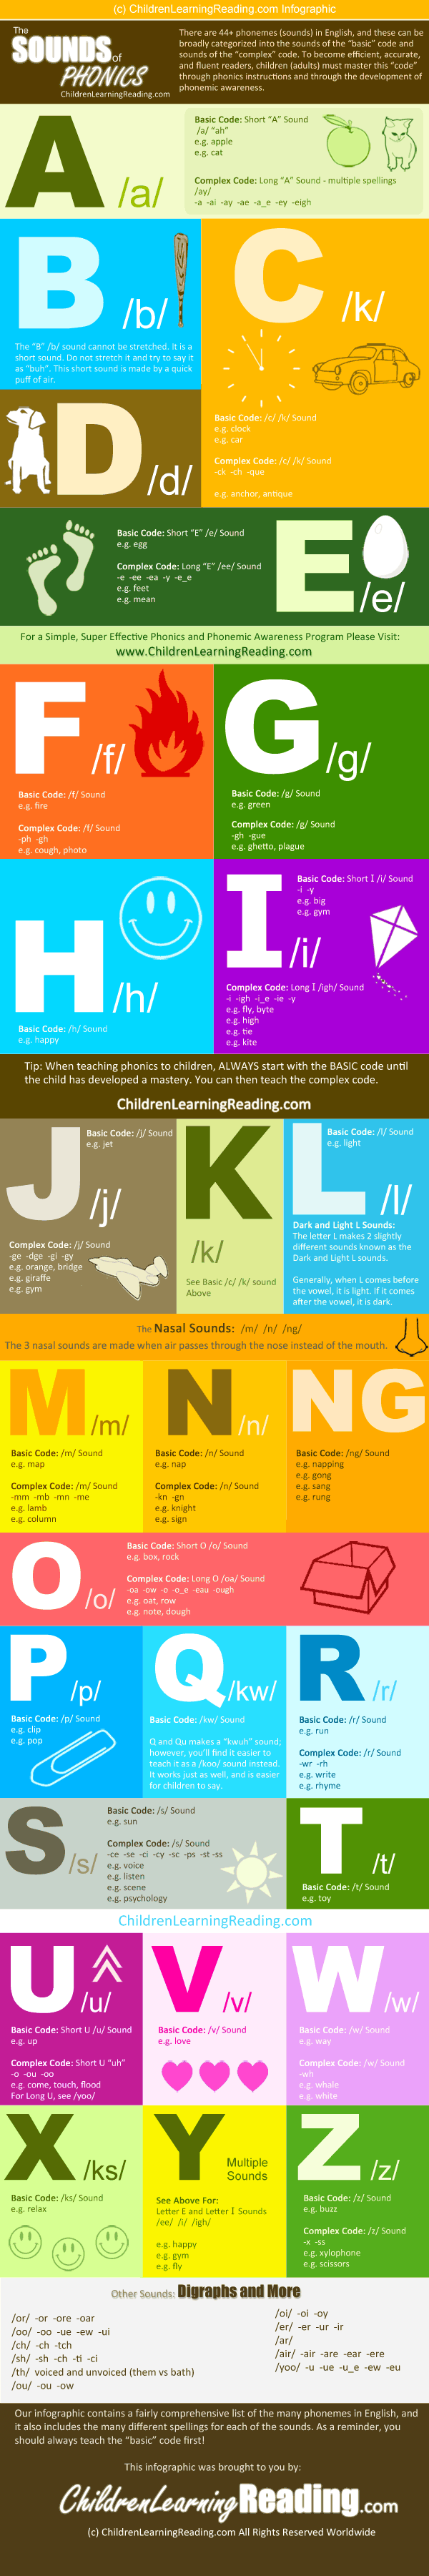 infographic-phonics-sounds, children learning reading review, children-learning-reading-review, Children Learning Reading Program Review, how to teach a child to read, how to teach a kid to read, how to teach a child to read